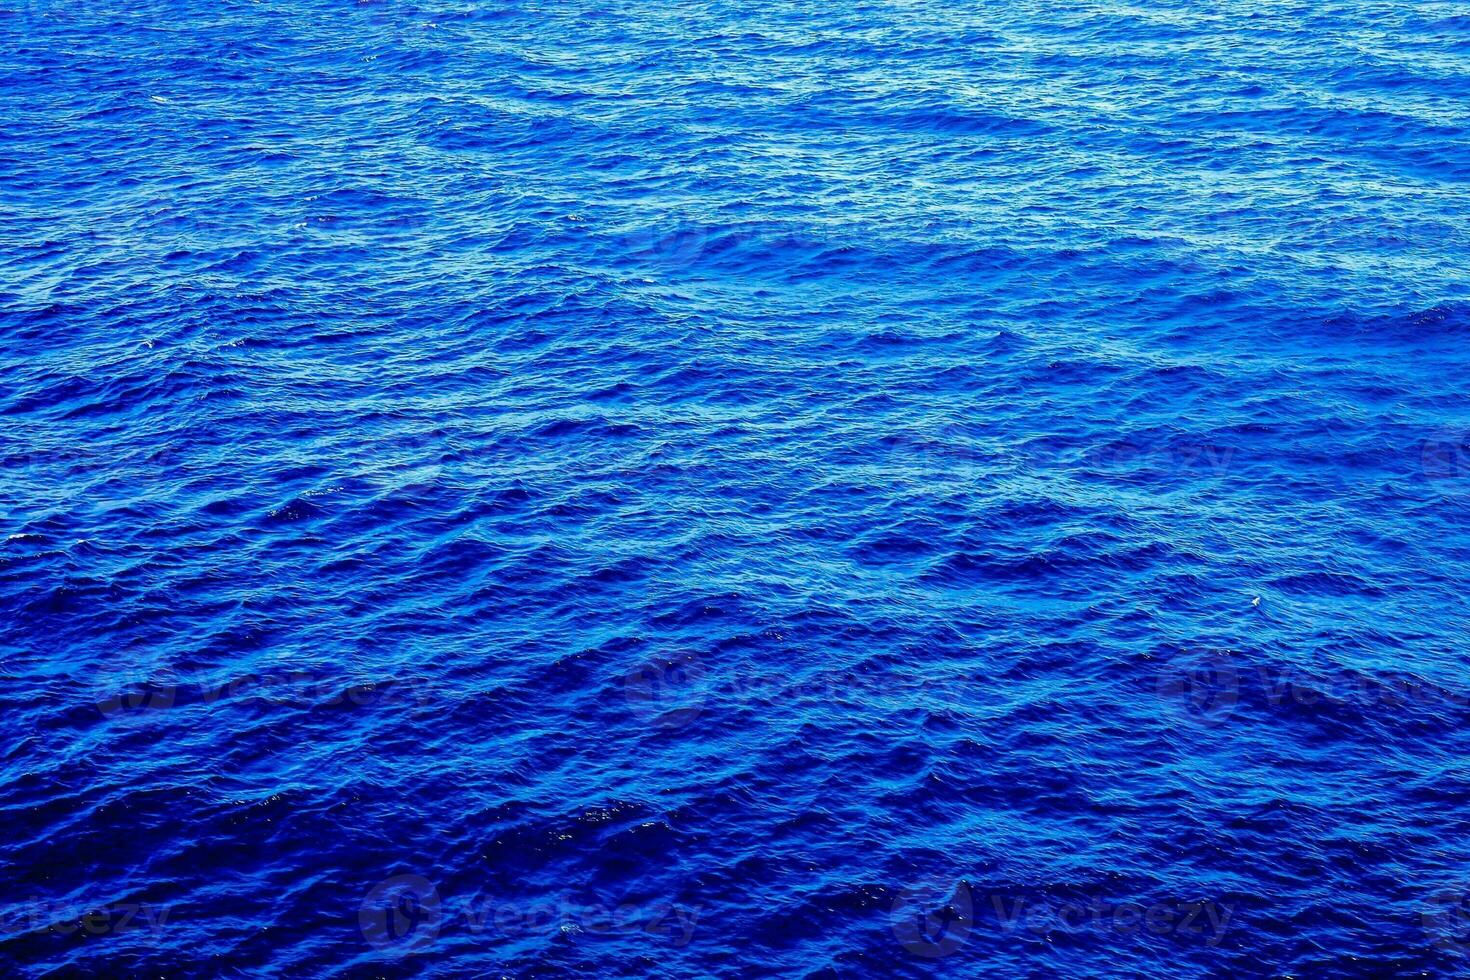 Water surface texture photo